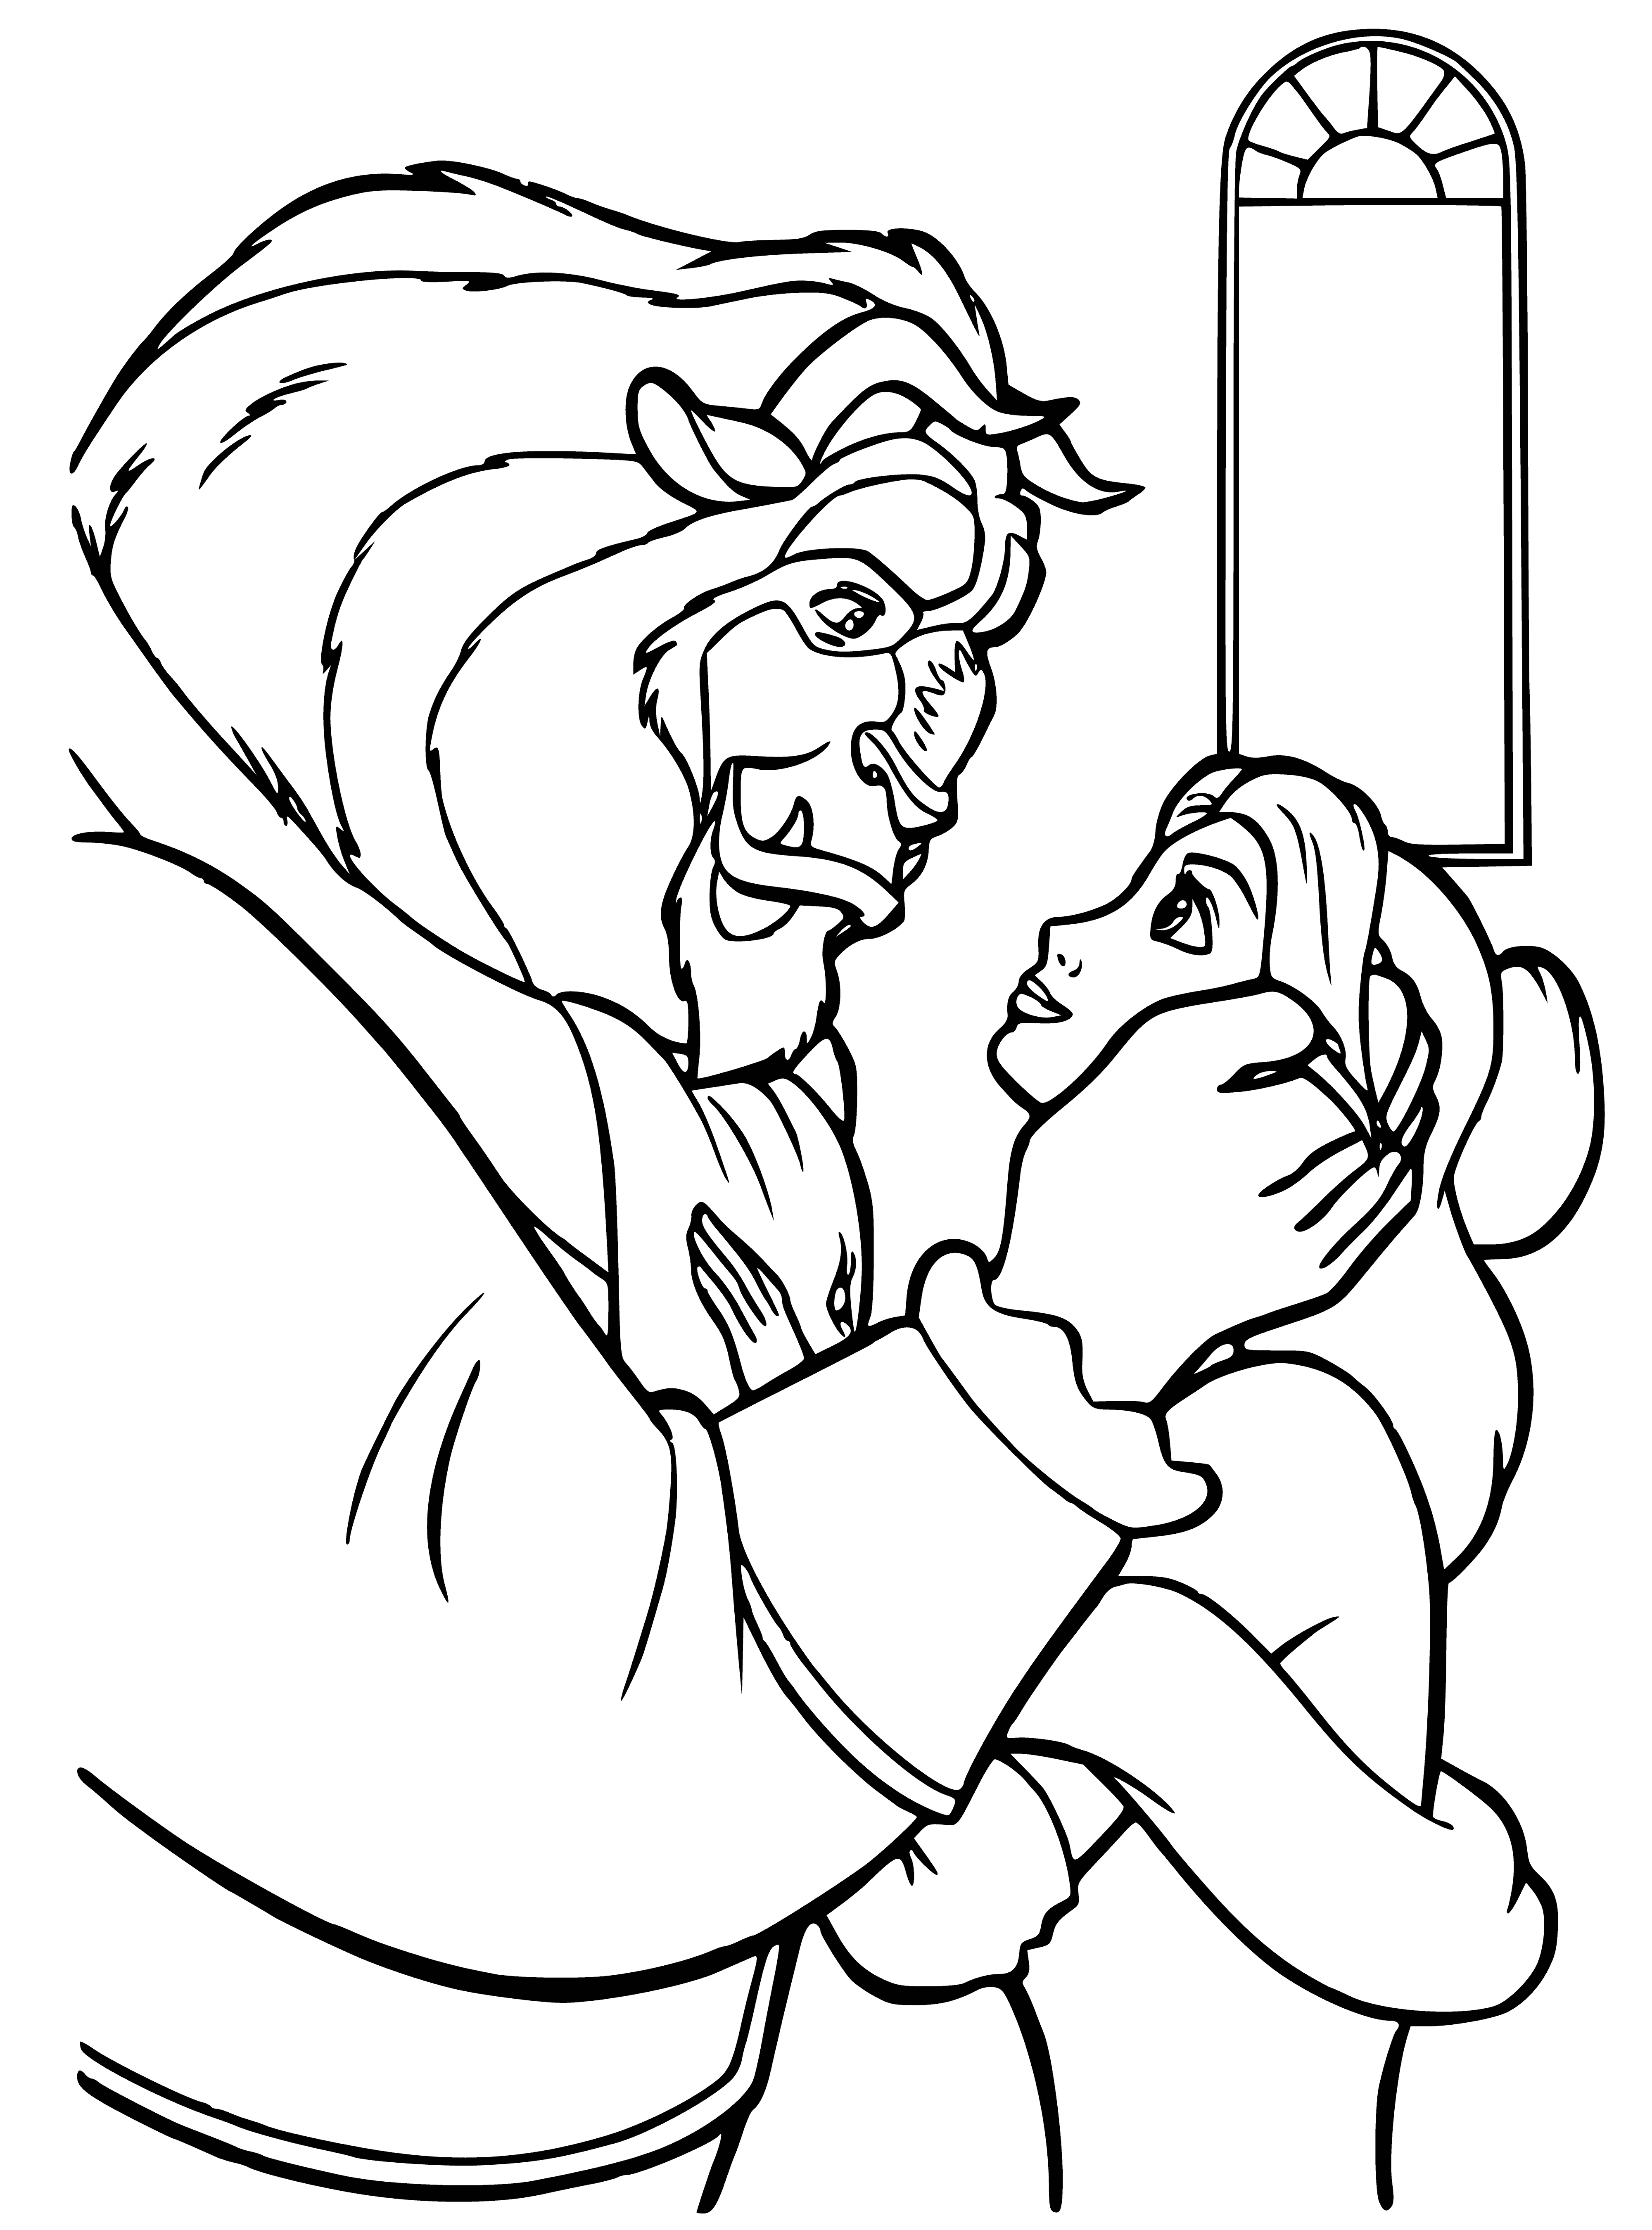 coloring page: Young woman looks at man who stares at a large, furry Beast, holding a rose. #fairytale